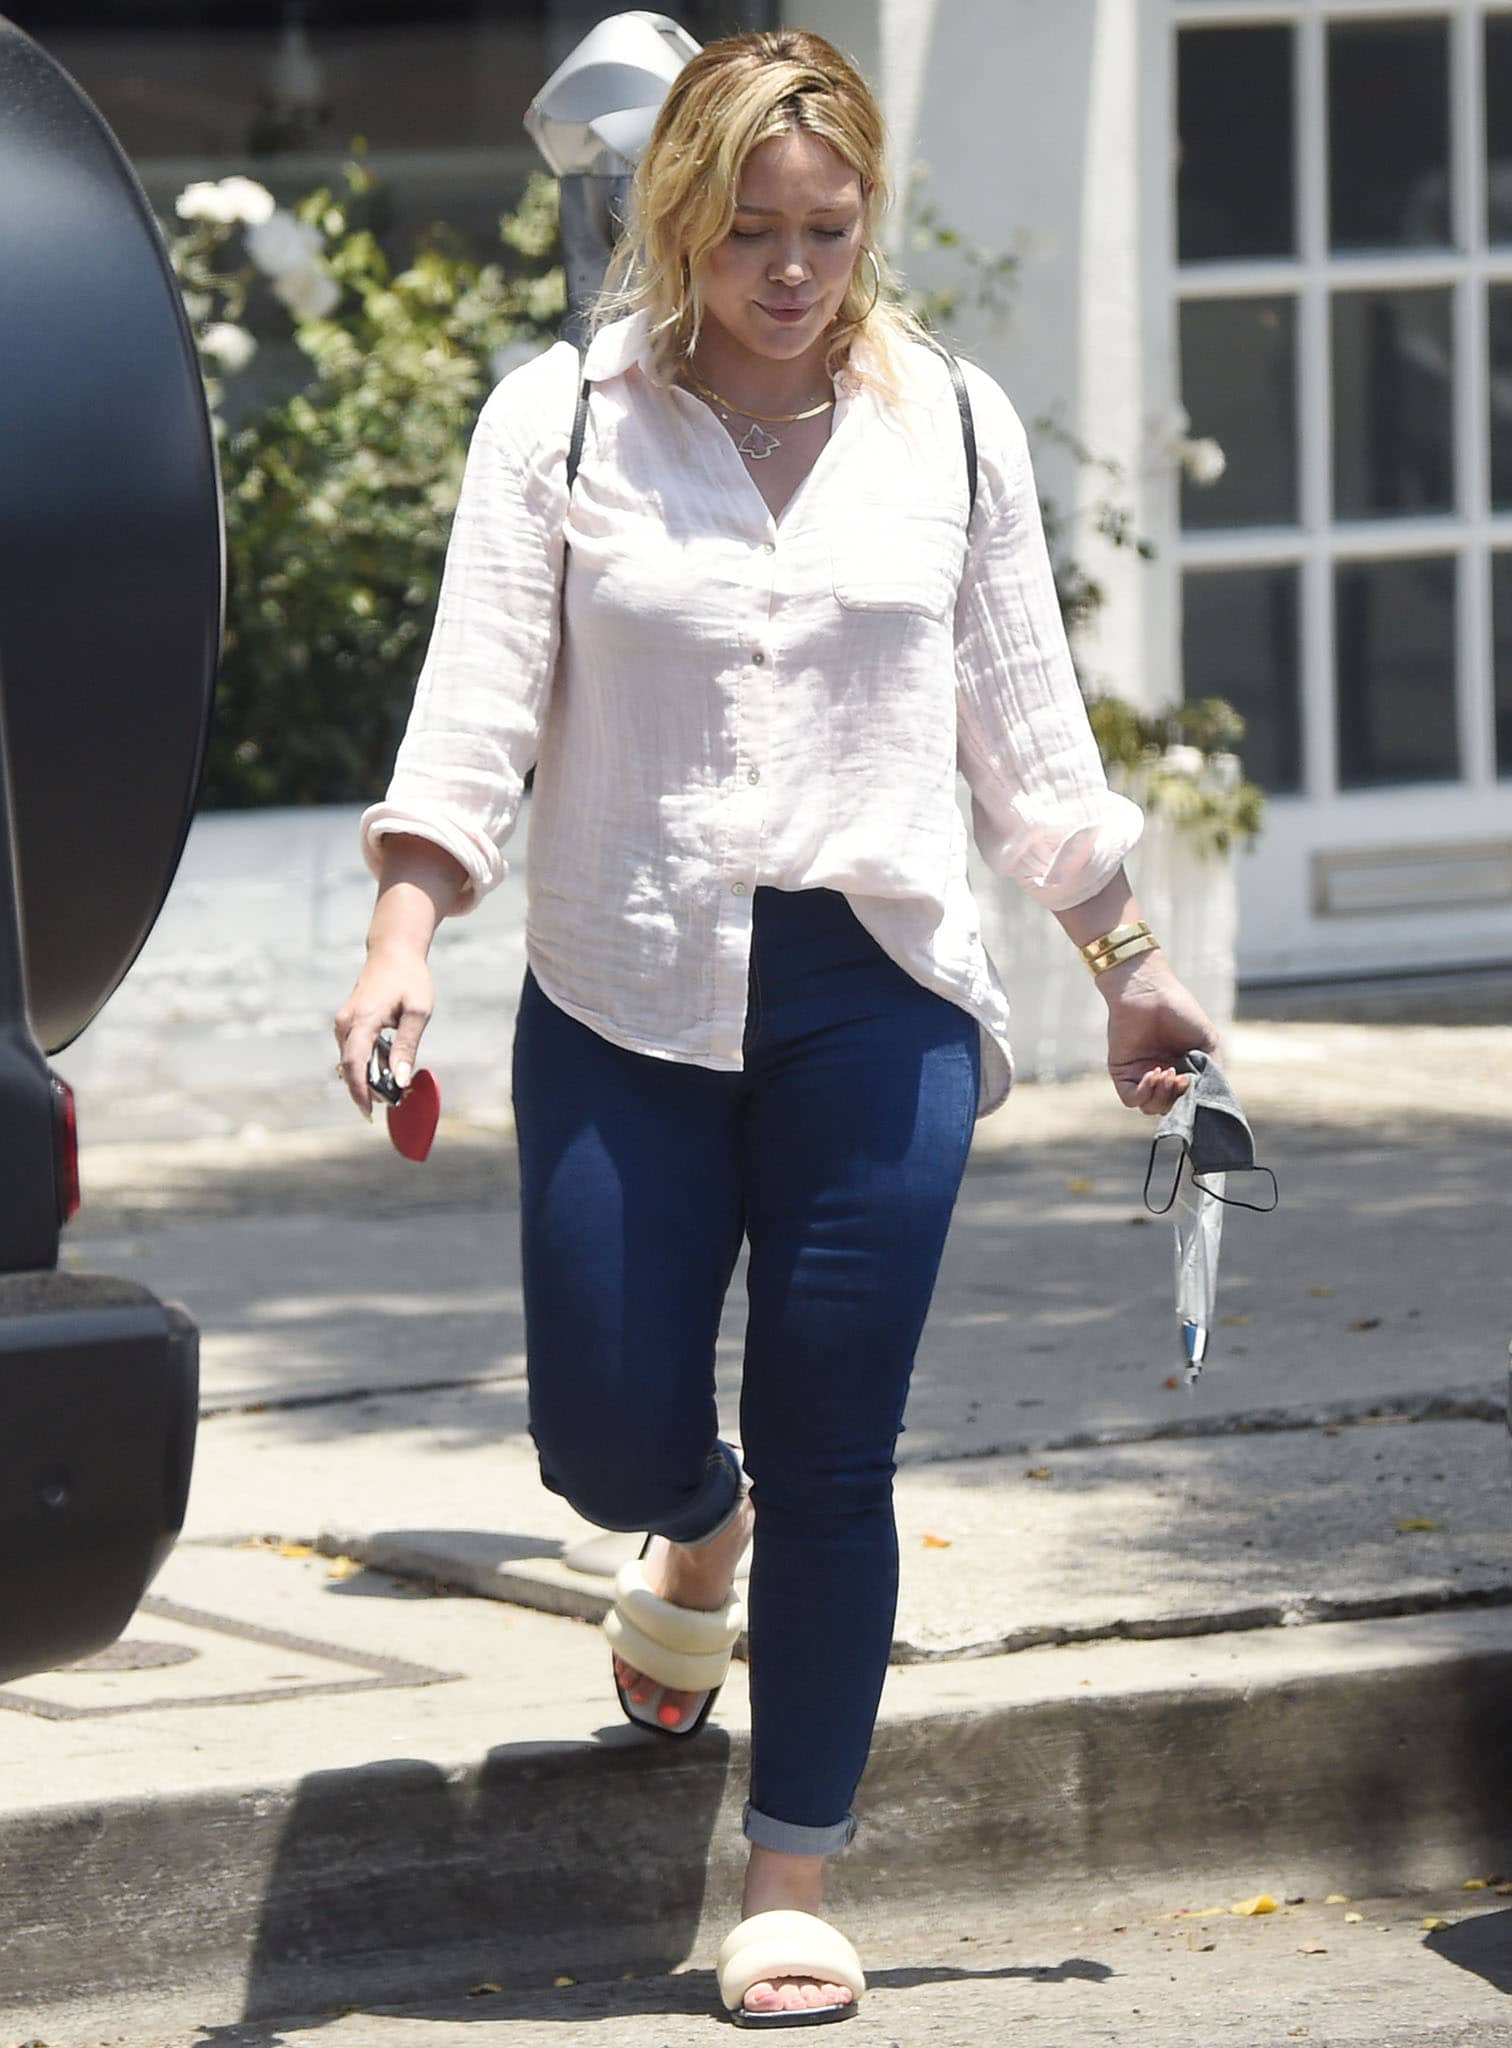 Hilary Duff's casual outfit includes a white long-sleeved shirt and a pair of skinny blue jeans